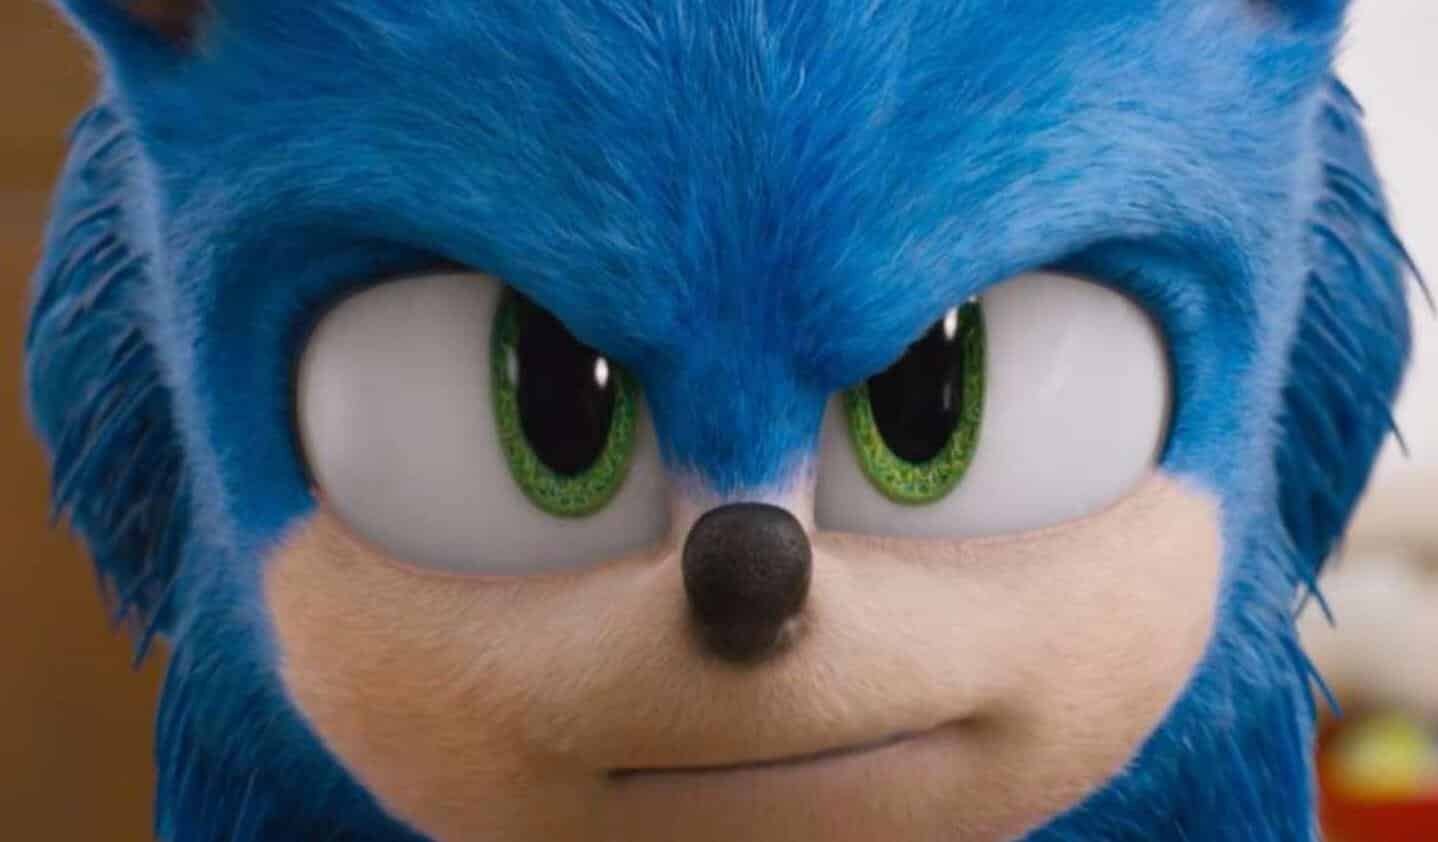 Sonic the Hedgehog - wide 9